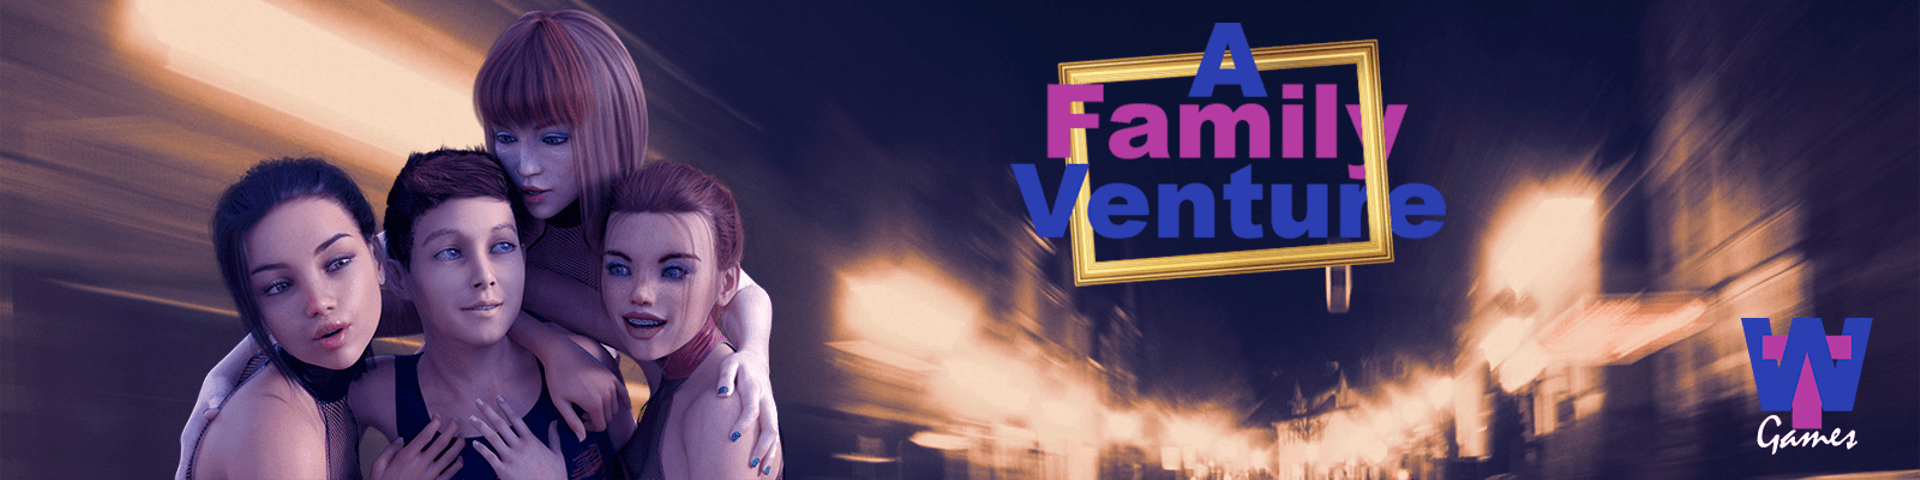 A Family Venture – Version 0.05b - Patreon incest adult game 6